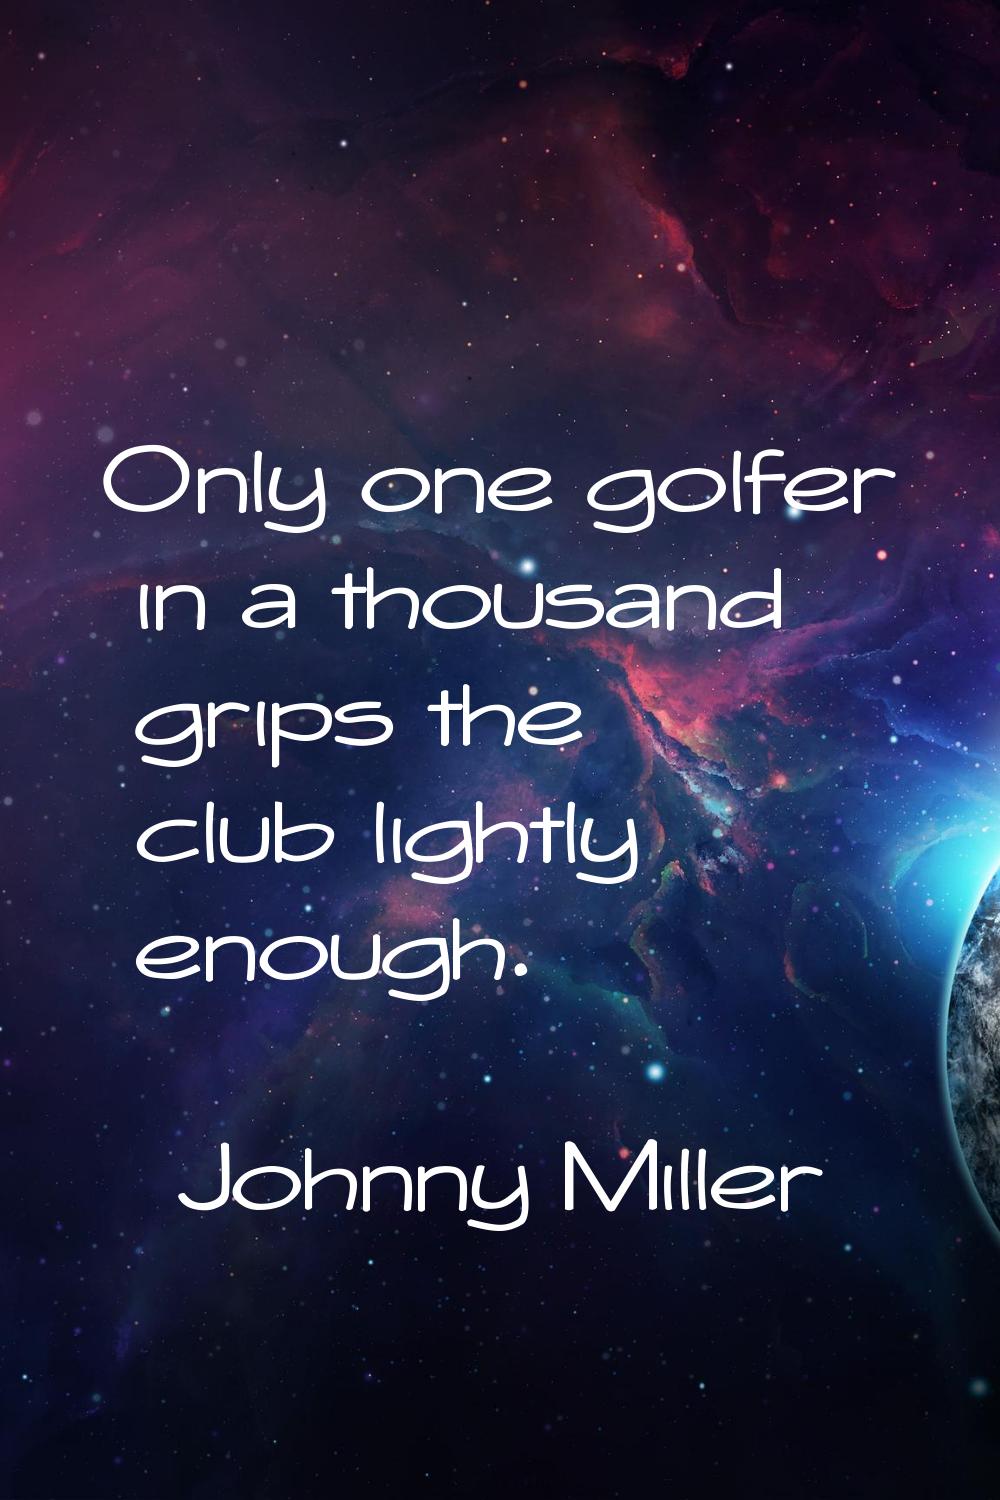 Only one golfer in a thousand grips the club lightly enough.